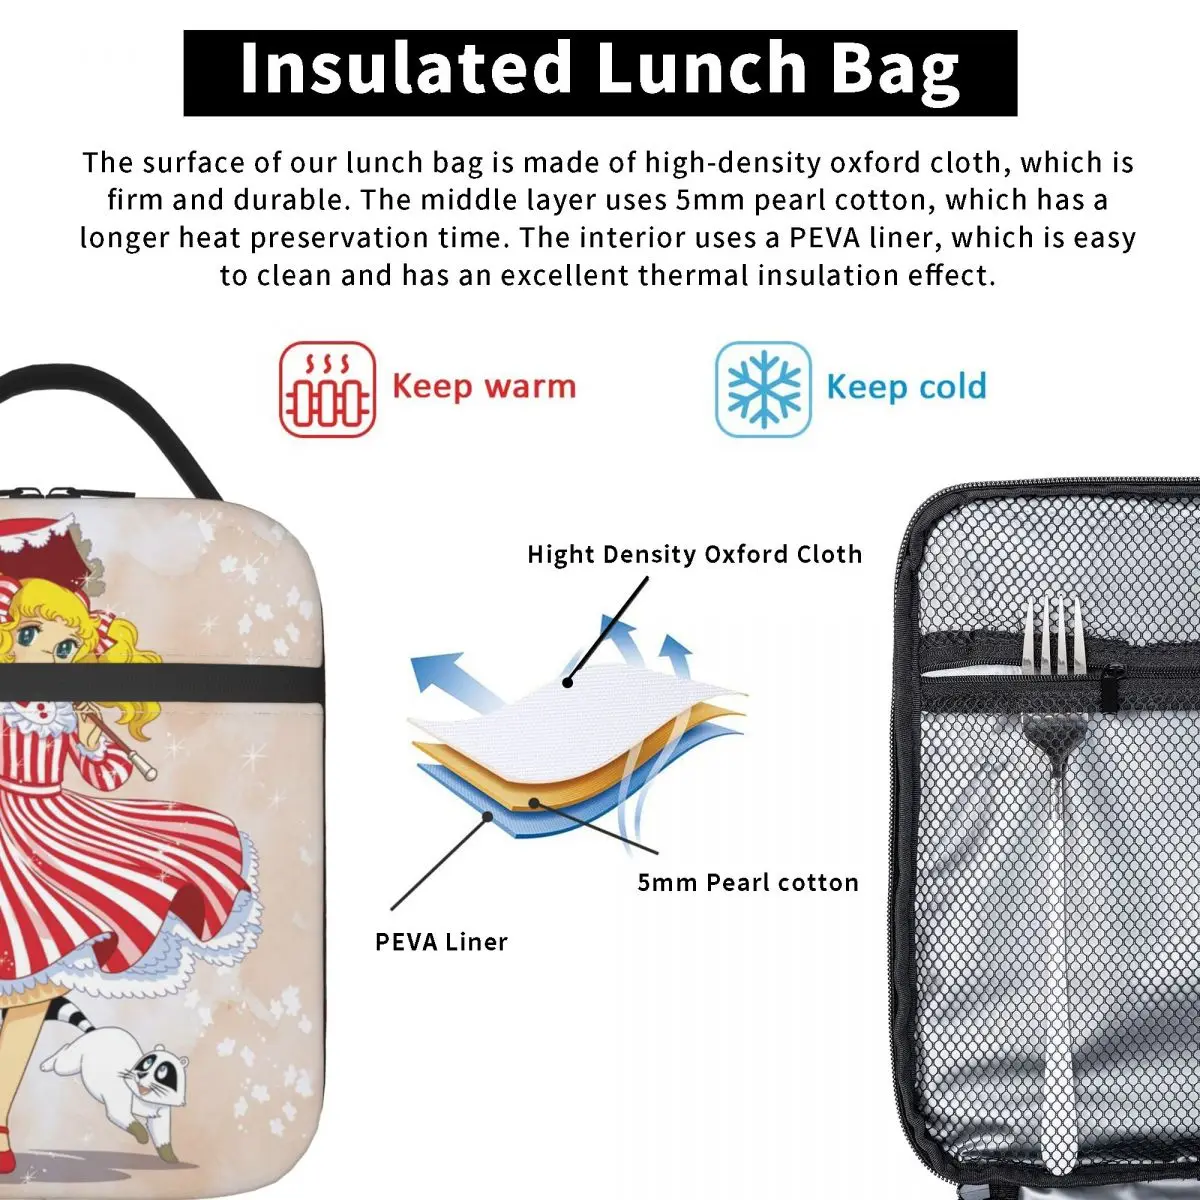 https://ae01.alicdn.com/kf/Scf0c8c5b6d3f4aec82aa66f70b854cdek/Candy-Candy-Thermal-Insulated-Lunch-Bags-Women-Japan-Anime-Manga-Resuable-Lunch-Container-for-Picnic-Multifunction.jpg